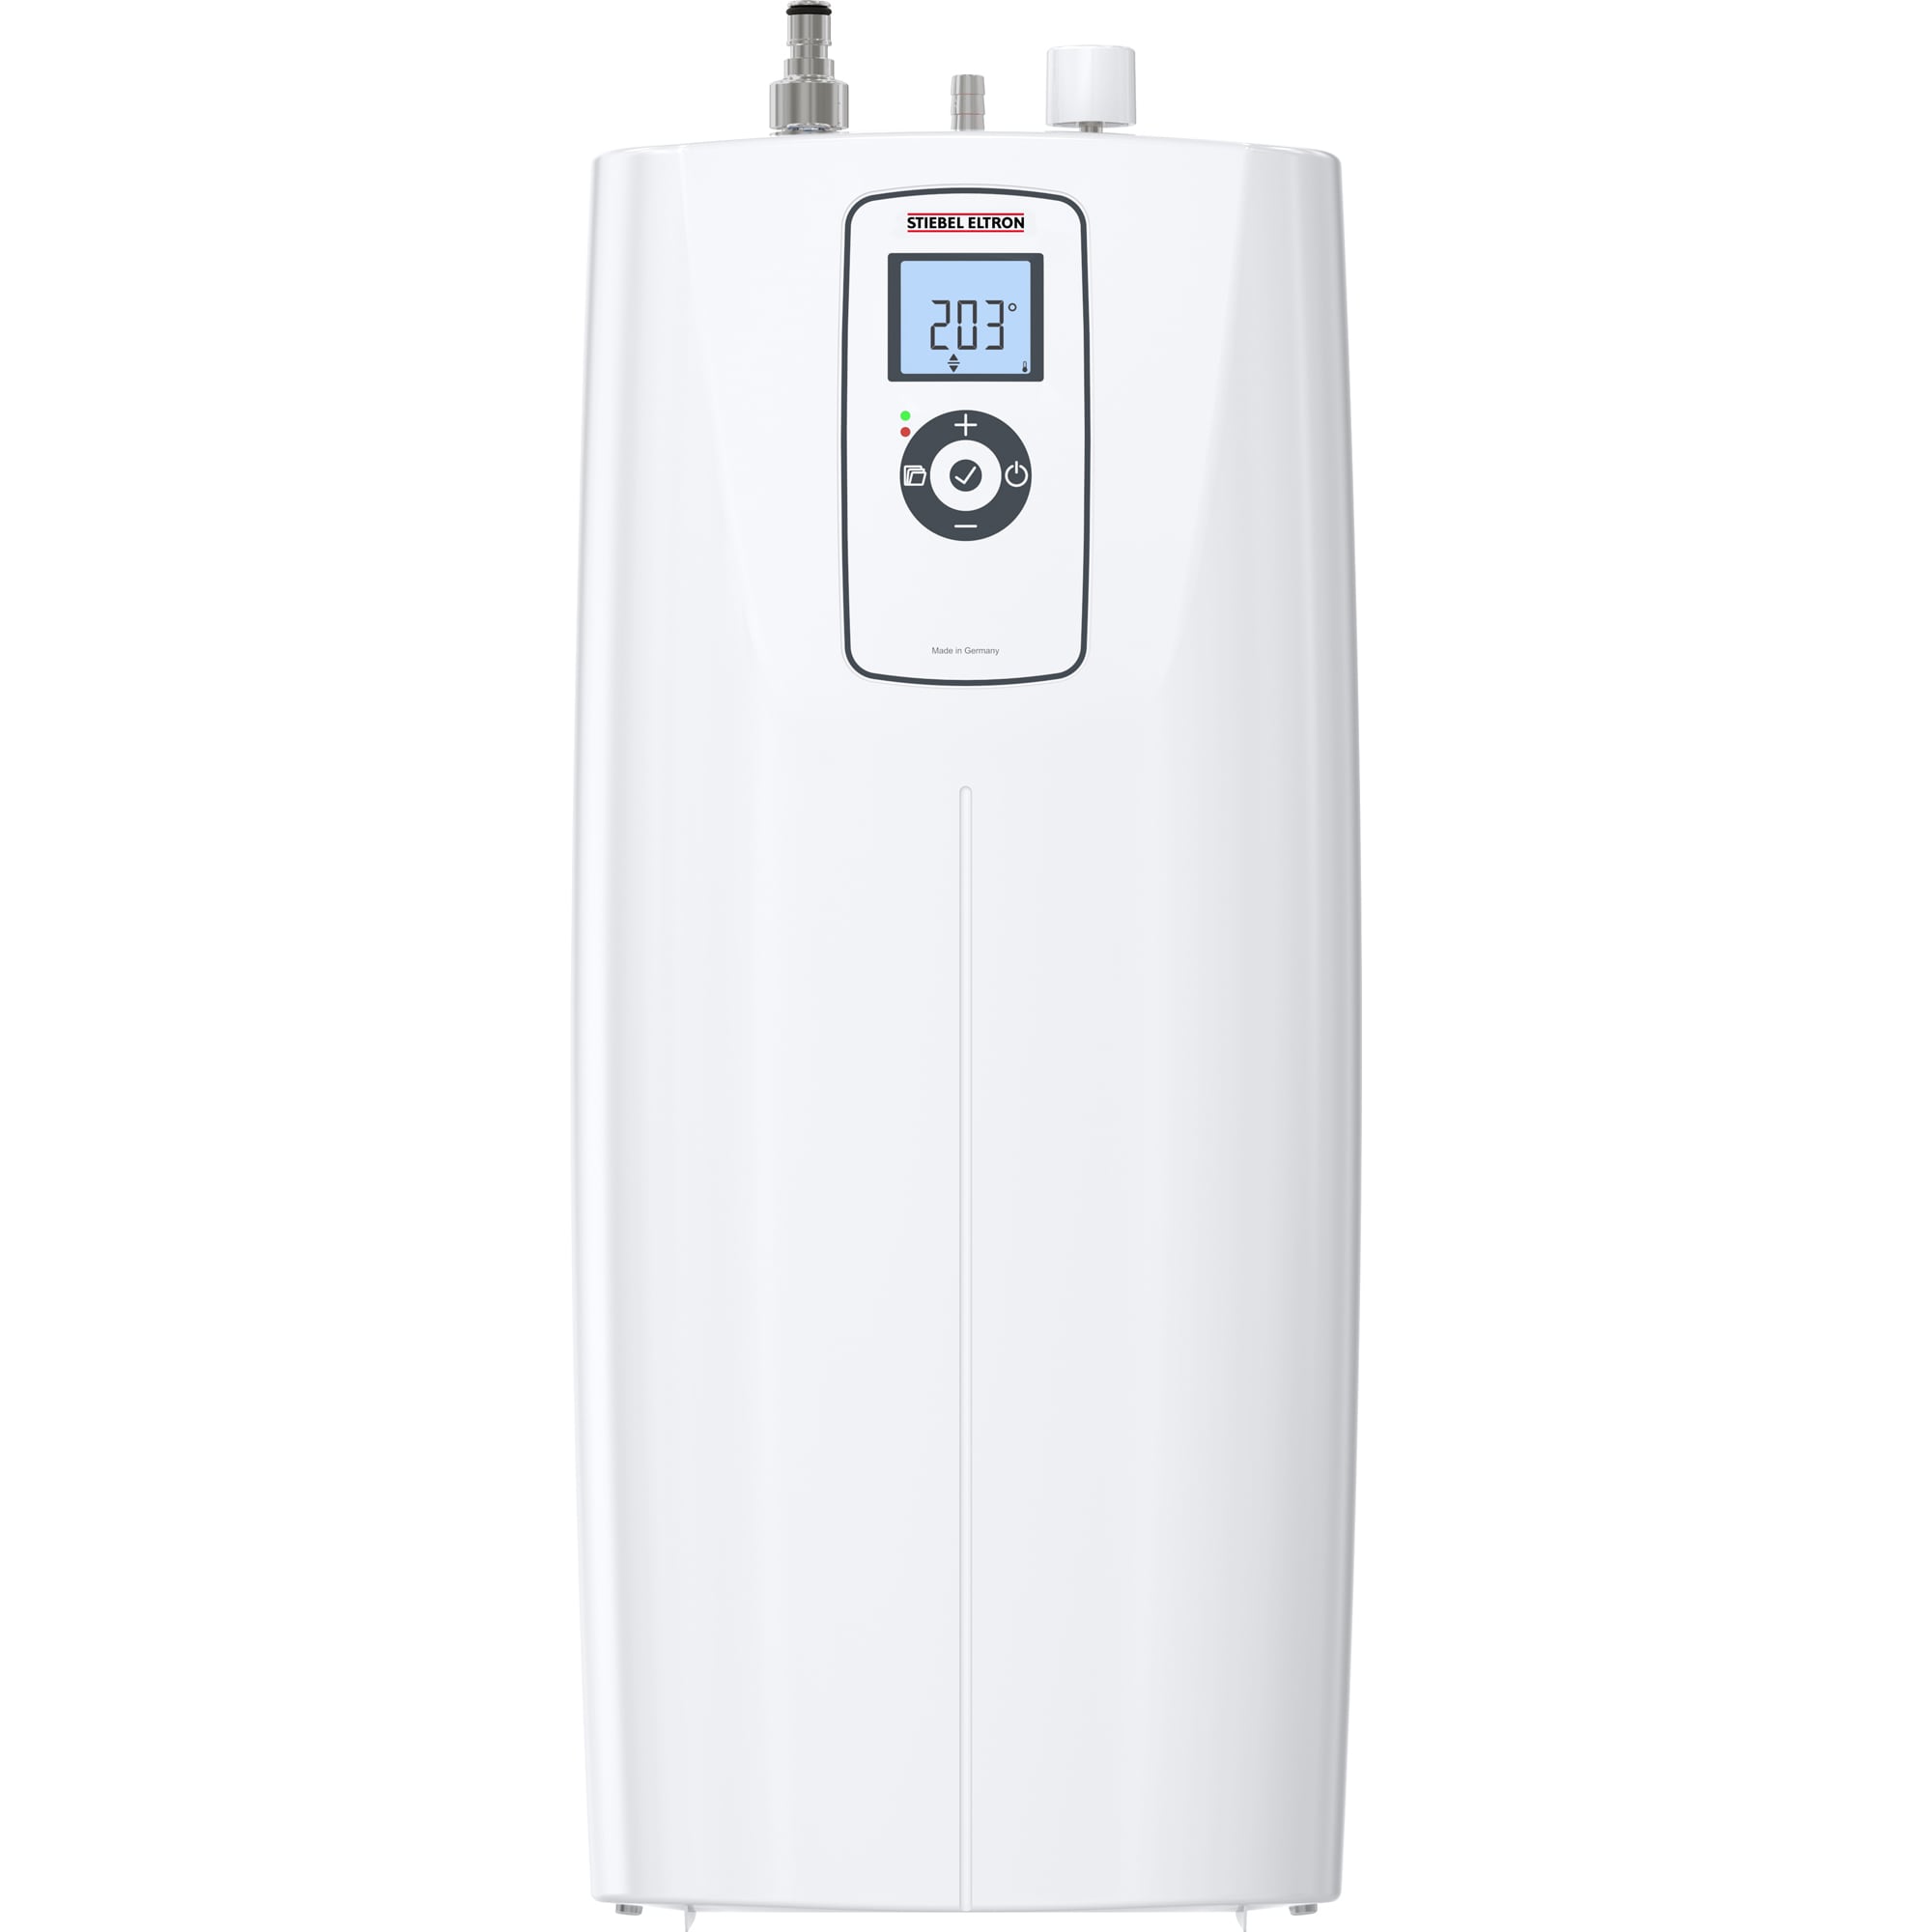 Instant Hot Water Systems - 5 Reasons To Use Instant Hot Water